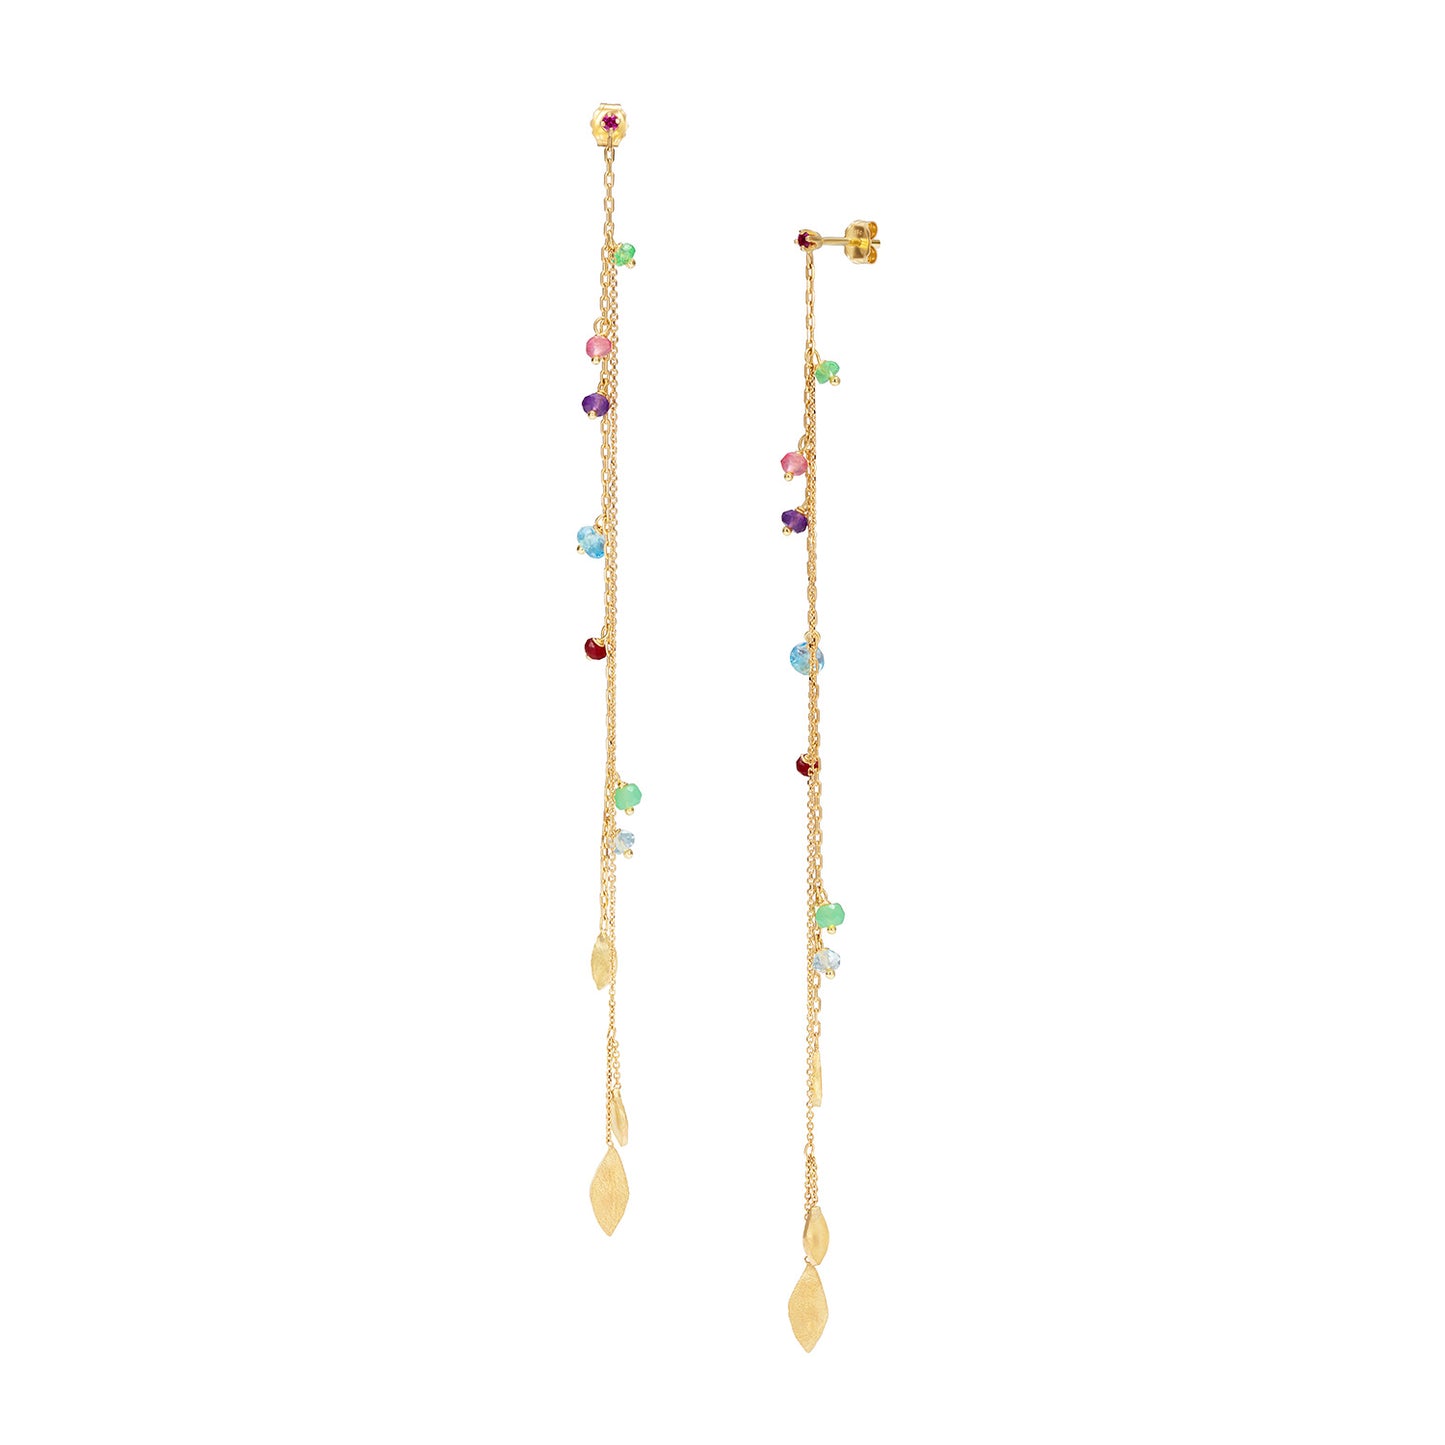 18ct Gold claw set Pink Sapphire stud earrings with a dangling long chain featuring mixed stones and gold leaves